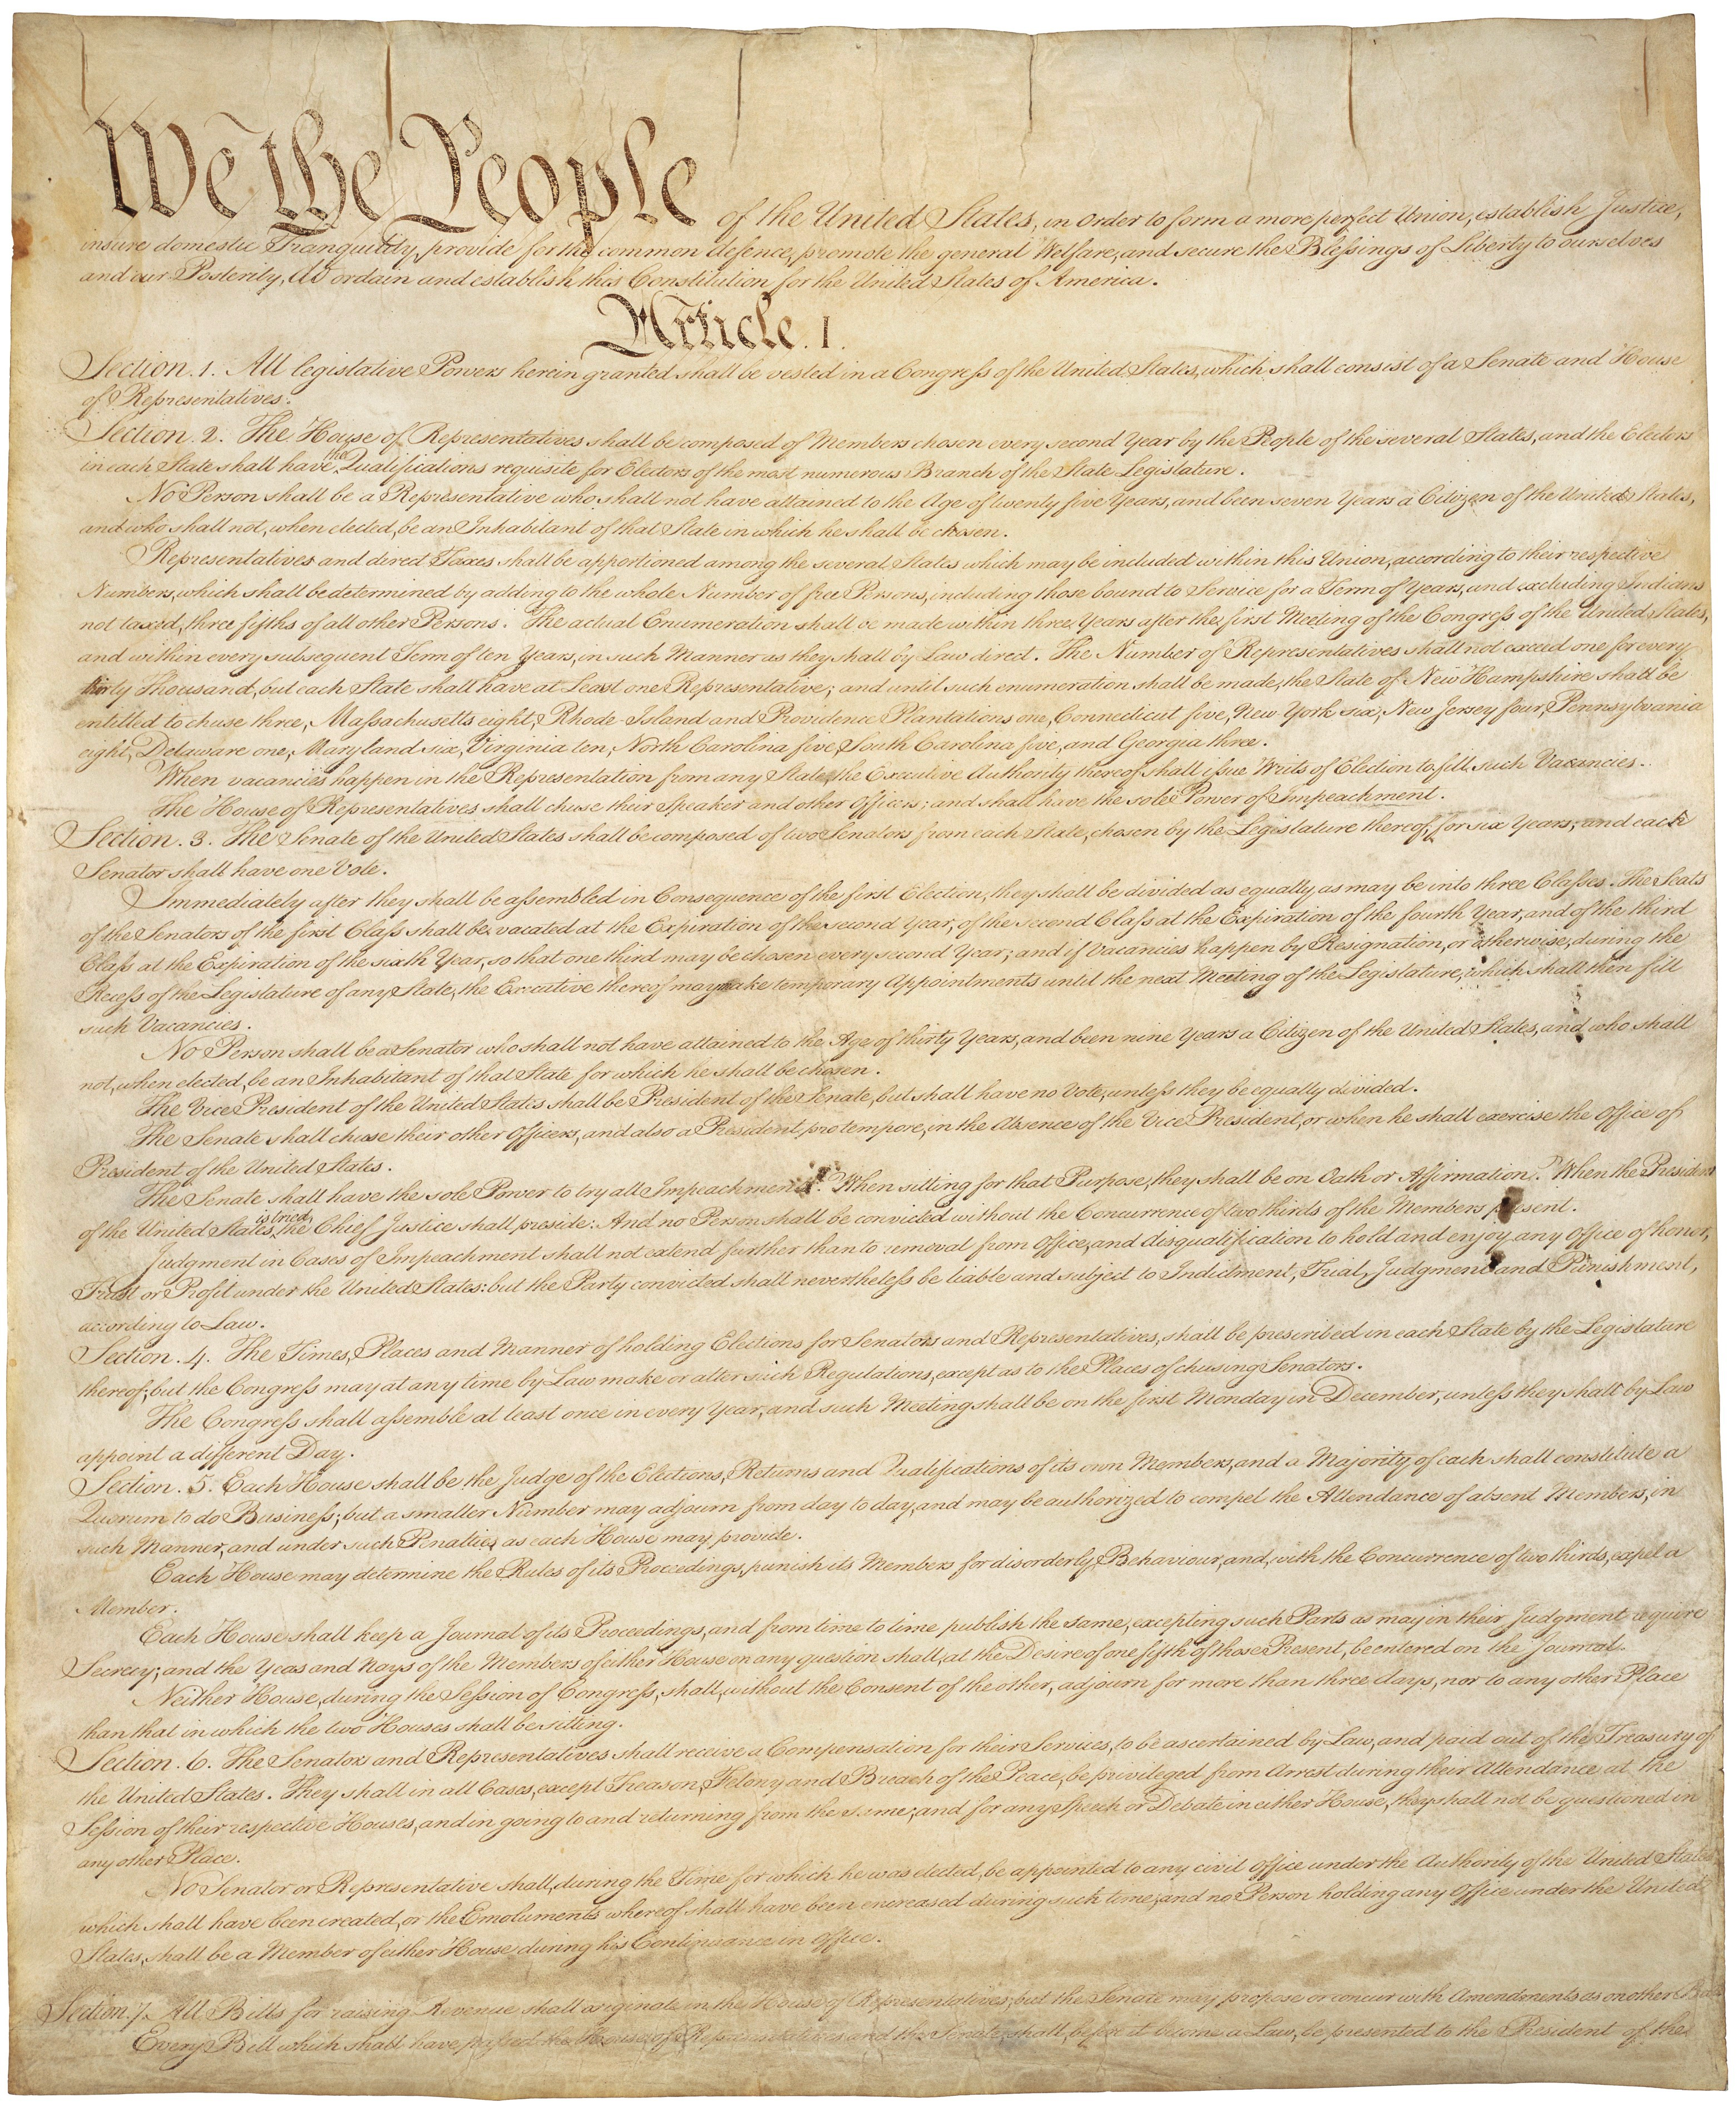 Detail from The Constitution of the United States. Please click on the link below to view and resize full image.